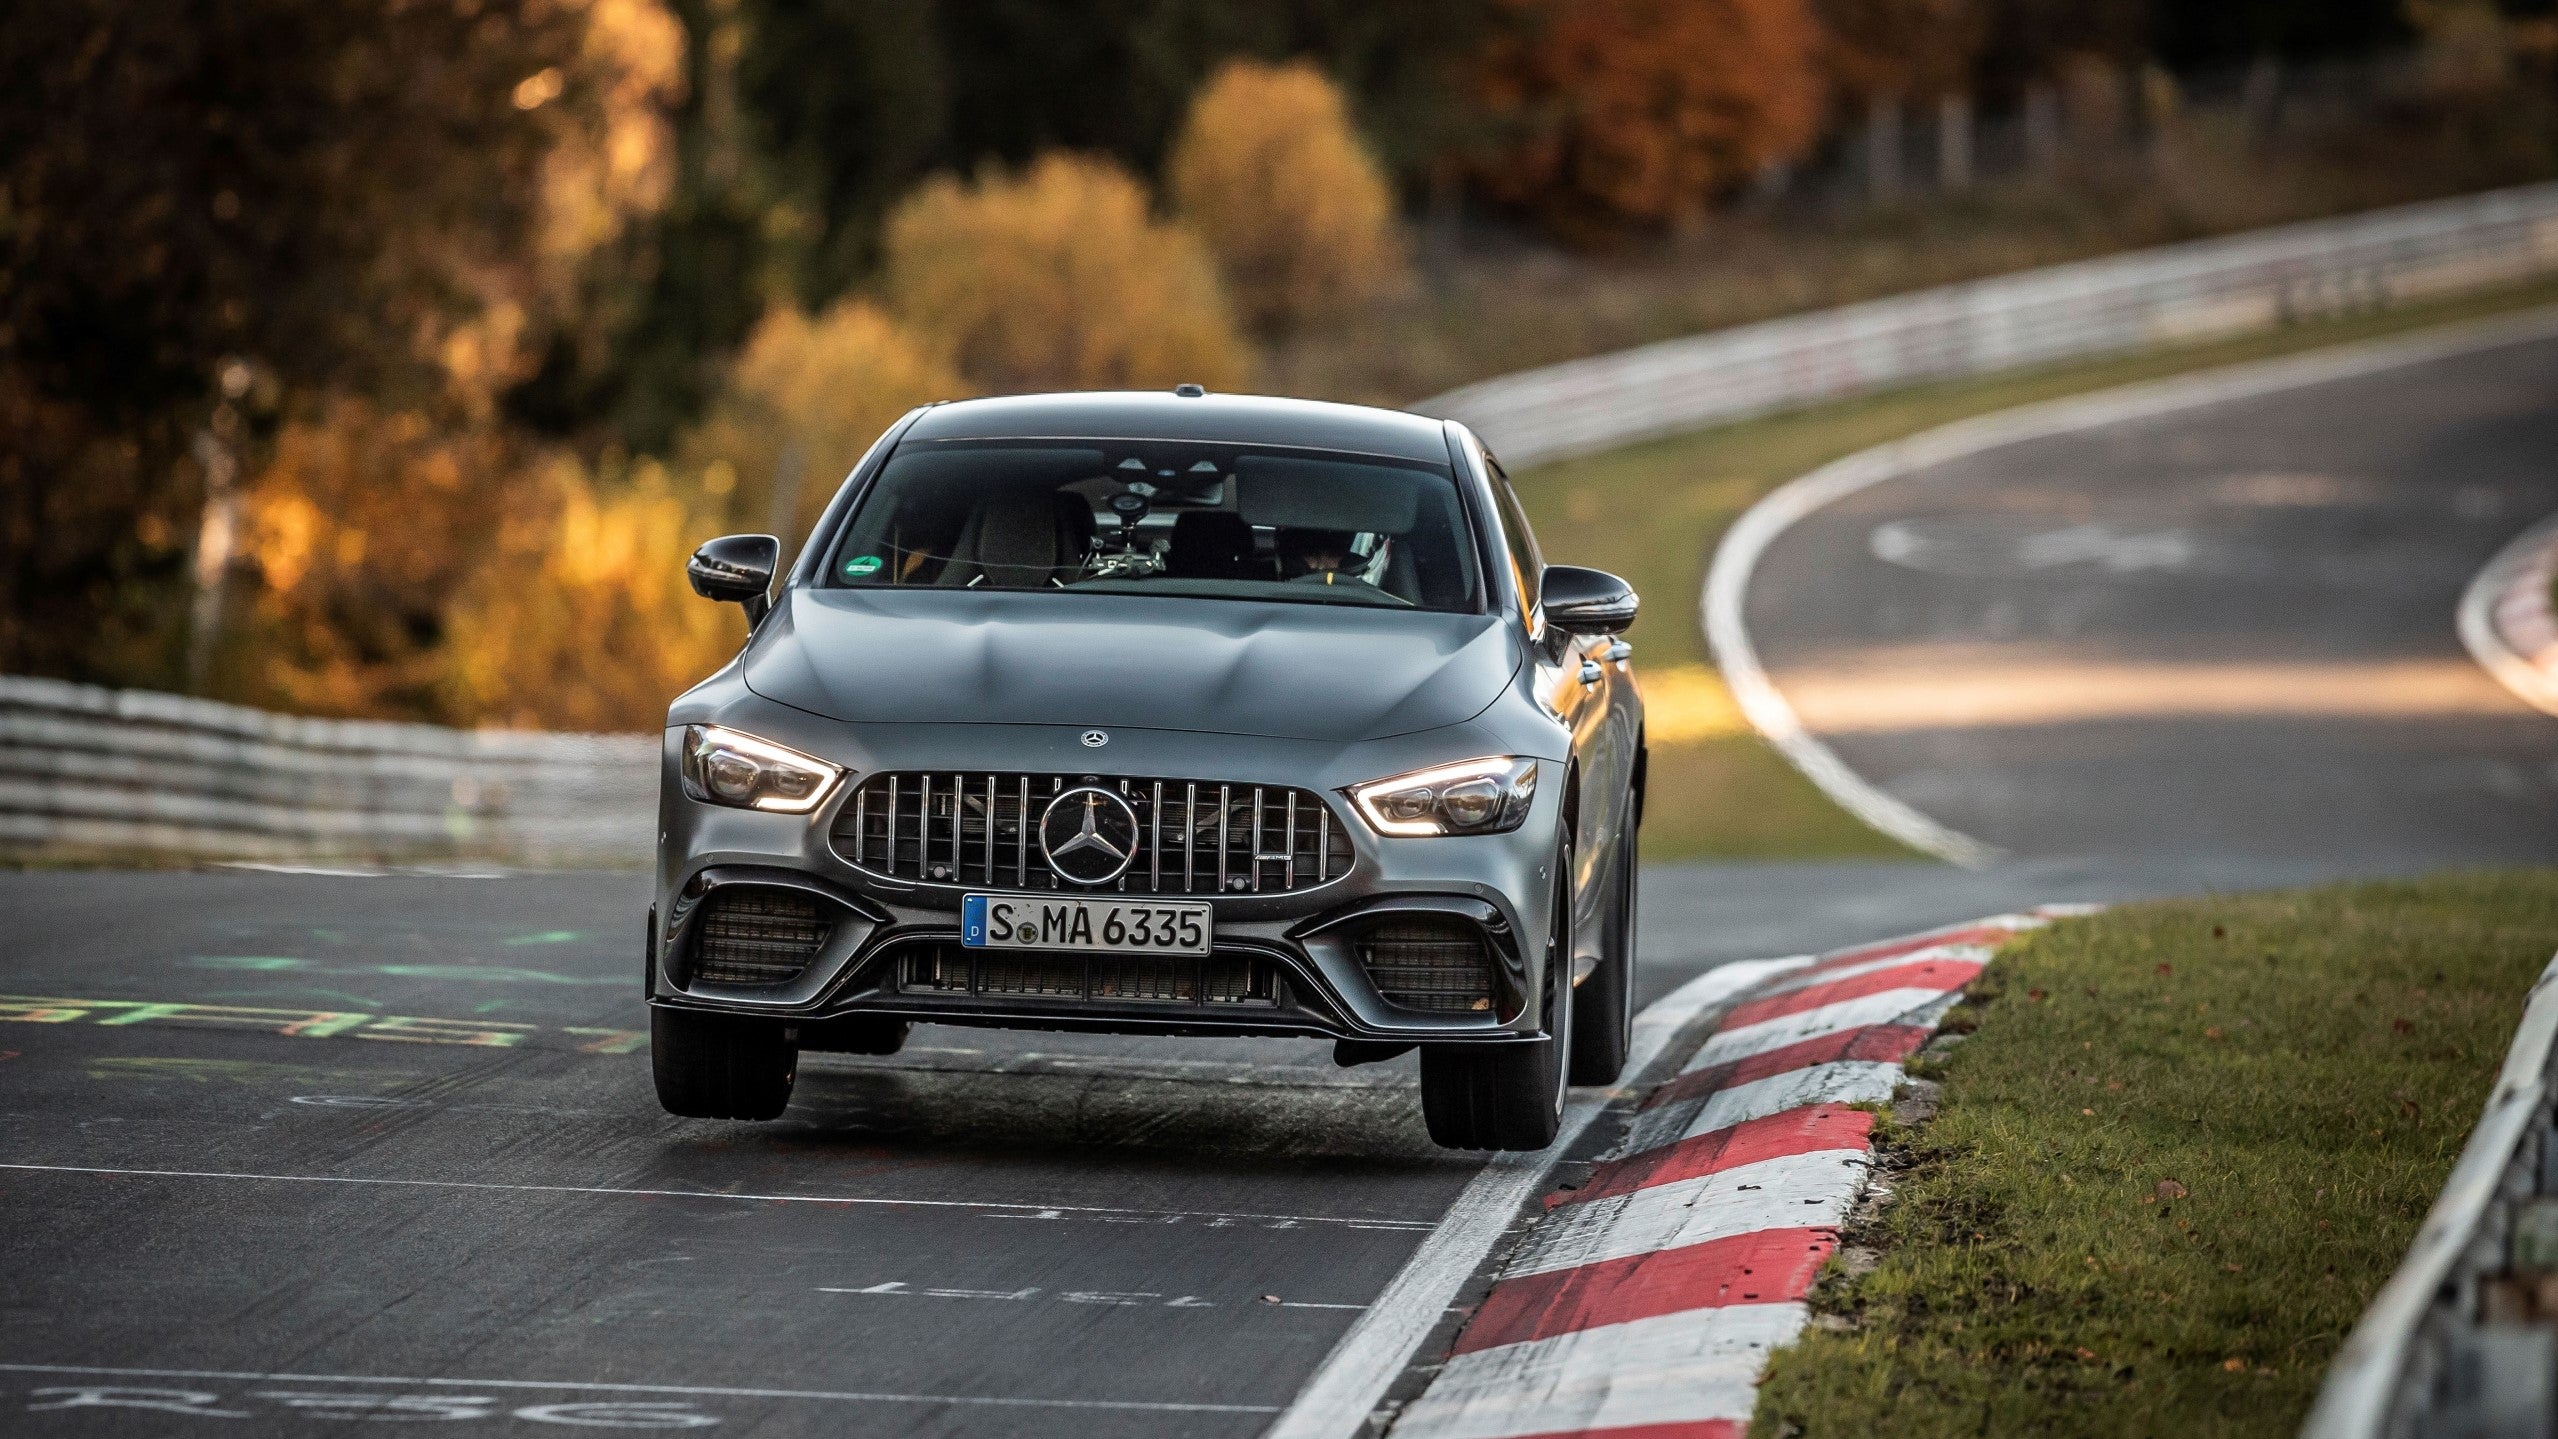 The 2021 Mercedes-AMG GT 63 S 4-Door Is Officially the Quickest ‘Luxury Car’ to Lap the Nurburgring